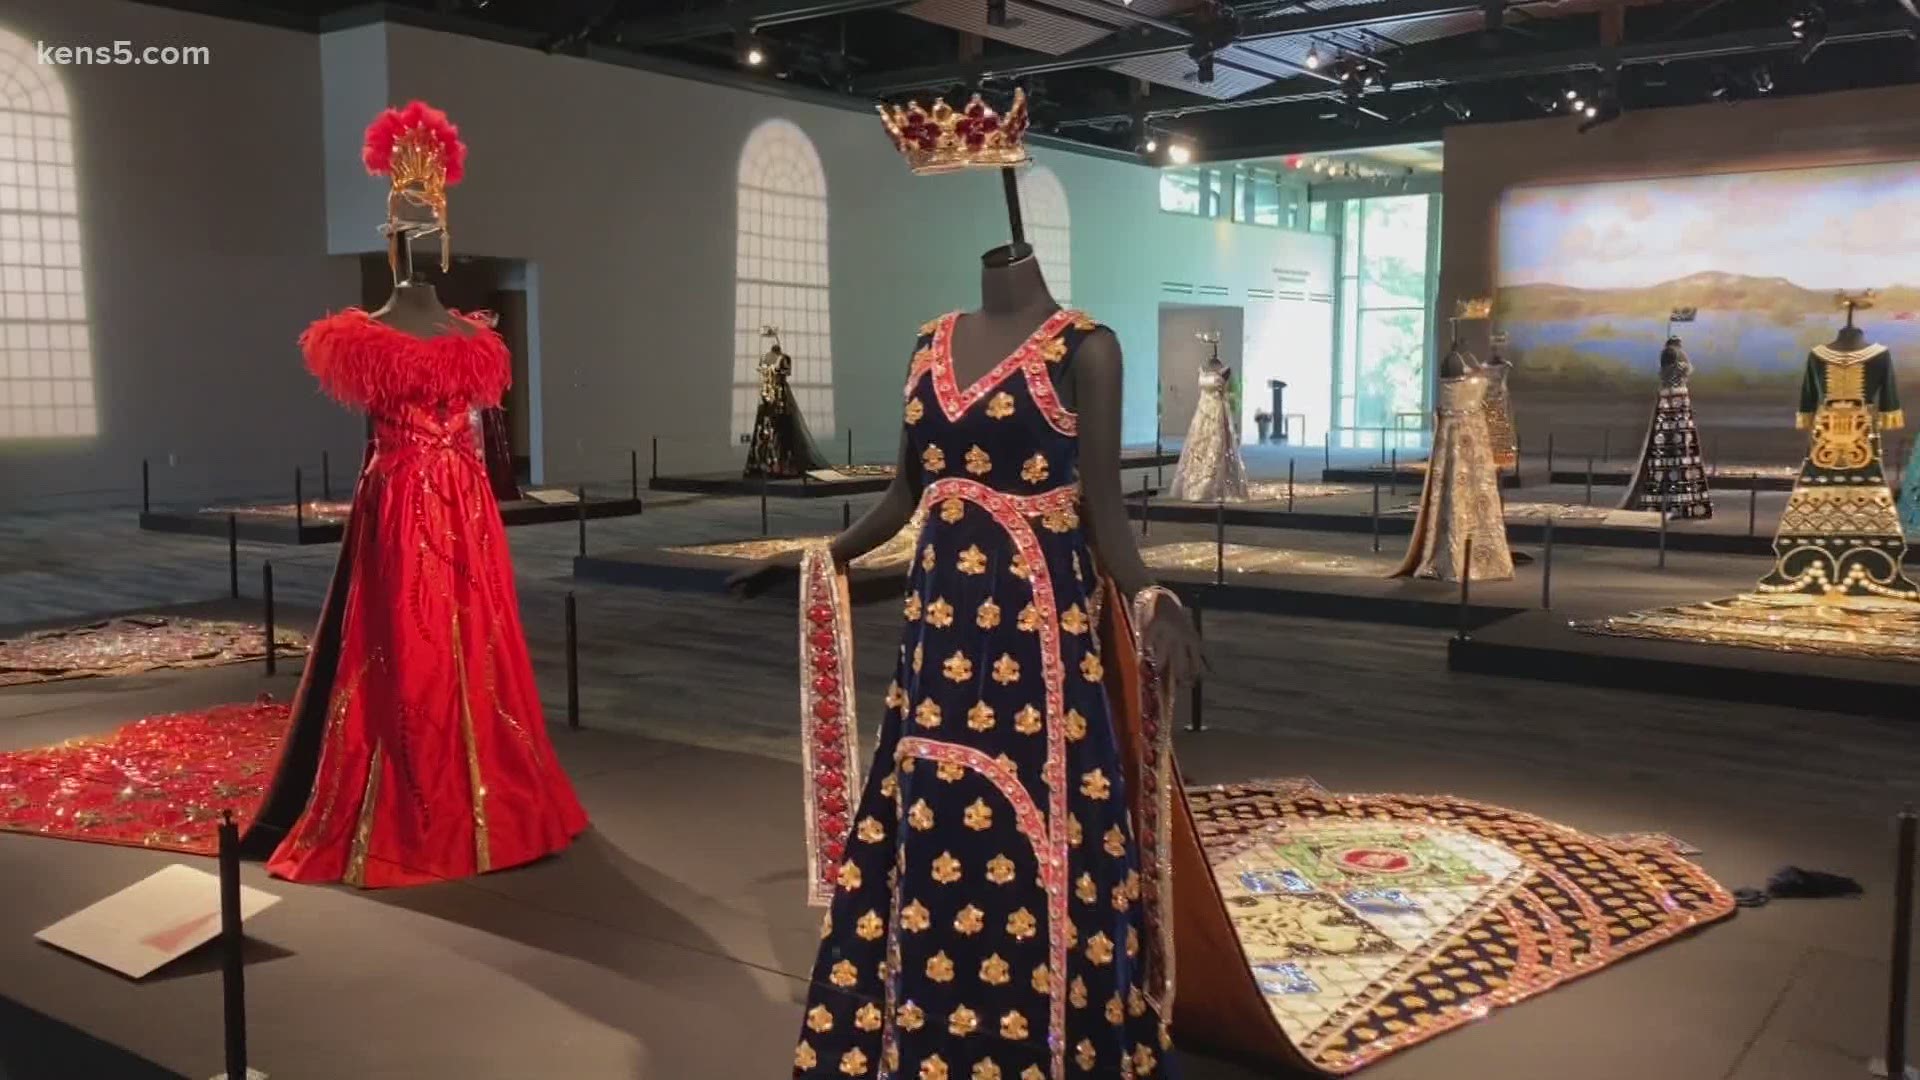 Want to see the Fiesta coronation gowns that would have been worn this year? You can see them on display at the Witte Museum.